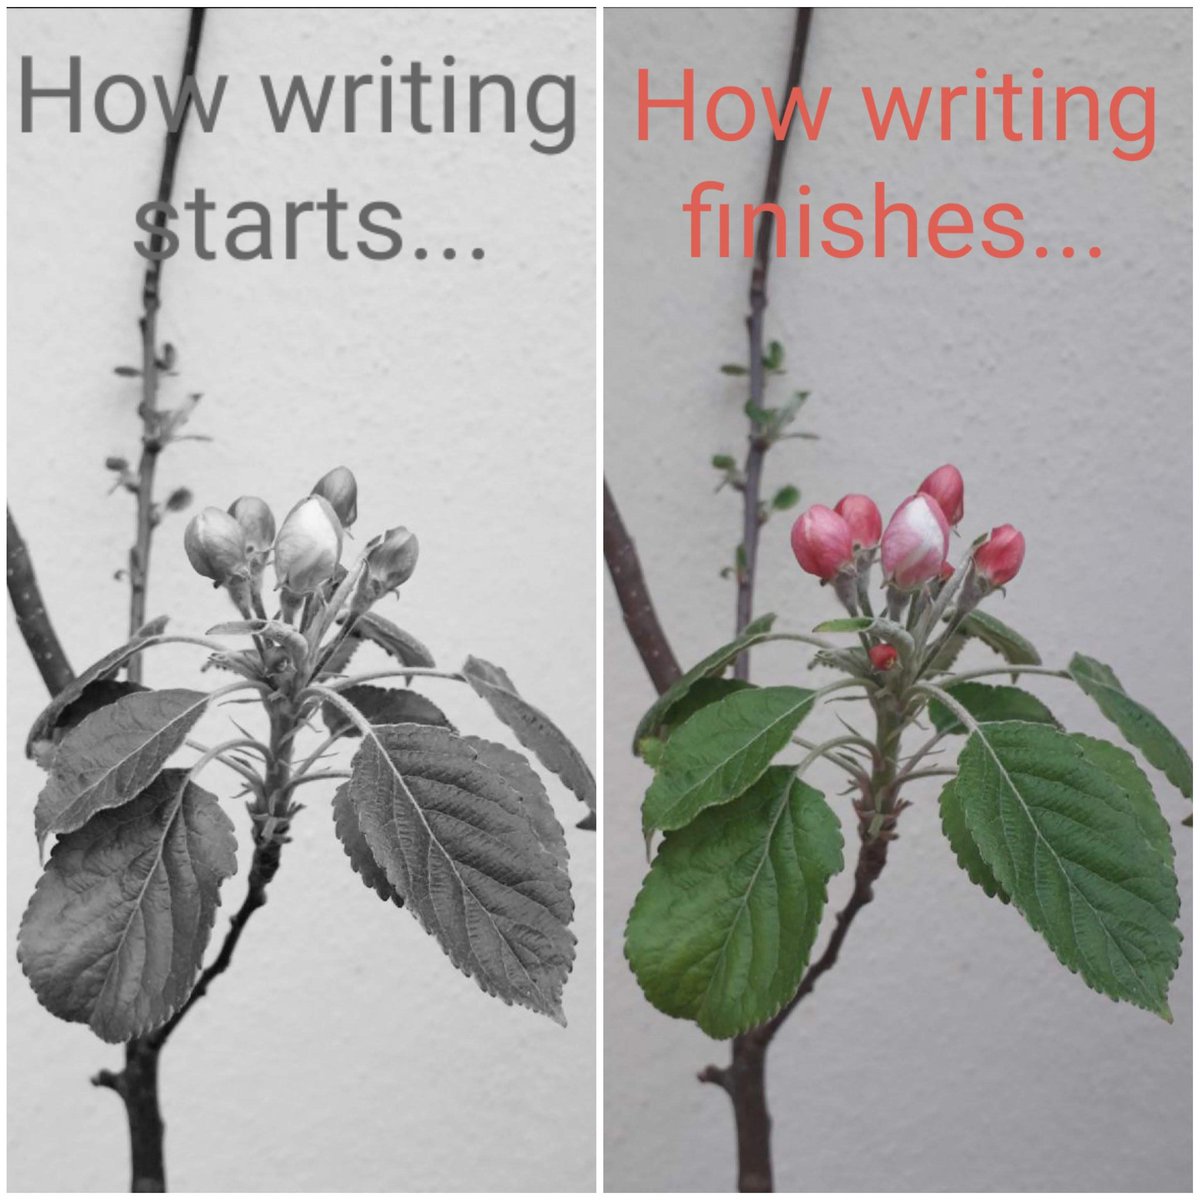 I think my writing is a lot more tangled squiggles in its infancy. It still blooms just as beautifully in the end.
#amwriting #writingcommunity #indieauthor #IndieApril #kidlit #adultromance #picturebook #novel #growth #nature
Links ⬇️